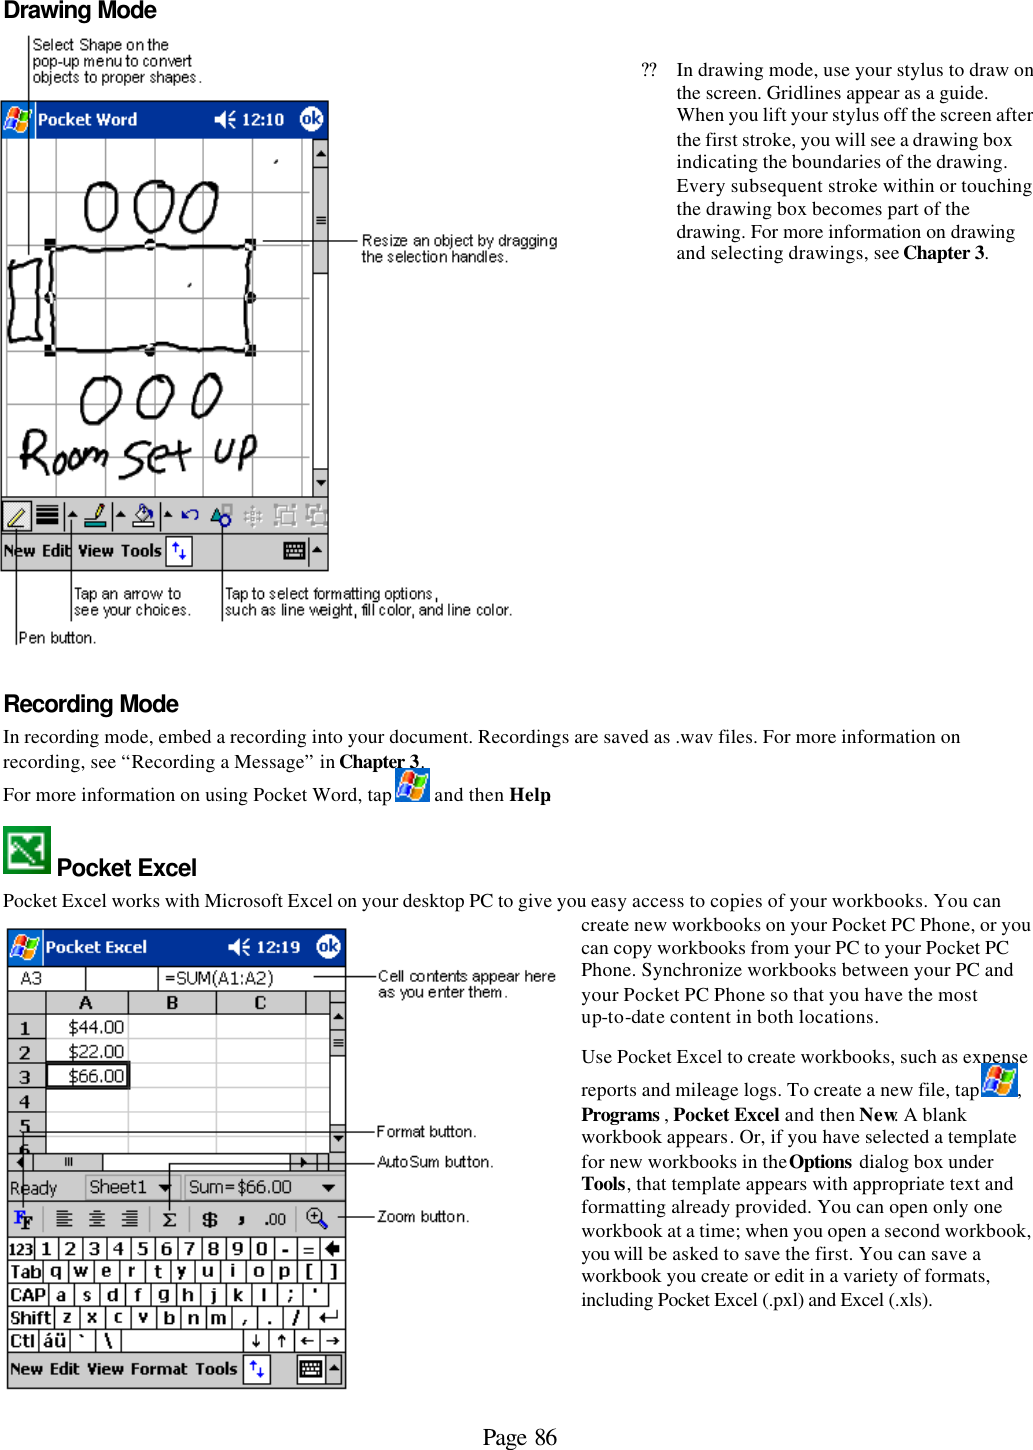 Page 86 Drawing Mode    ??In drawing mode, use your stylus to draw on the screen. Gridlines appear as a guide. When you lift your stylus off the screen after the first stroke, you will see a drawing box indicating the boundaries of the drawing. Every subsequent stroke within or touching the drawing box becomes part of the drawing. For more information on drawing and selecting drawings, see Chapter 3.  Recording Mode In recording mode, embed a recording into your document. Recordings are saved as .wav files. For more information on recording, see “Recording a Message” in Chapter 3. For more information on using Pocket Word, tap   and then Help.  Pocket Excel Pocket Excel works with Microsoft Excel on your desktop PC to give you easy access to copies of your workbooks. You can create new workbooks on your Pocket PC Phone, or you can copy workbooks from your PC to your Pocket PC Phone. Synchronize workbooks between your PC and your Pocket PC Phone so that you have the most up-to-date content in both locations. Use Pocket Excel to create workbooks, such as expense reports and mileage logs. To create a new file, tap  , Programs , Pocket Excel and then New. A blank workbook appears. Or, if you have selected a template for new workbooks in the Options dialog box under Tools, that template appears with appropriate text and formatting already provided. You can open only one workbook at a time; when you open a second workbook, you will be asked to save the first. You can save a workbook you create or edit in a variety of formats, including Pocket Excel (.pxl) and Excel (.xls).   